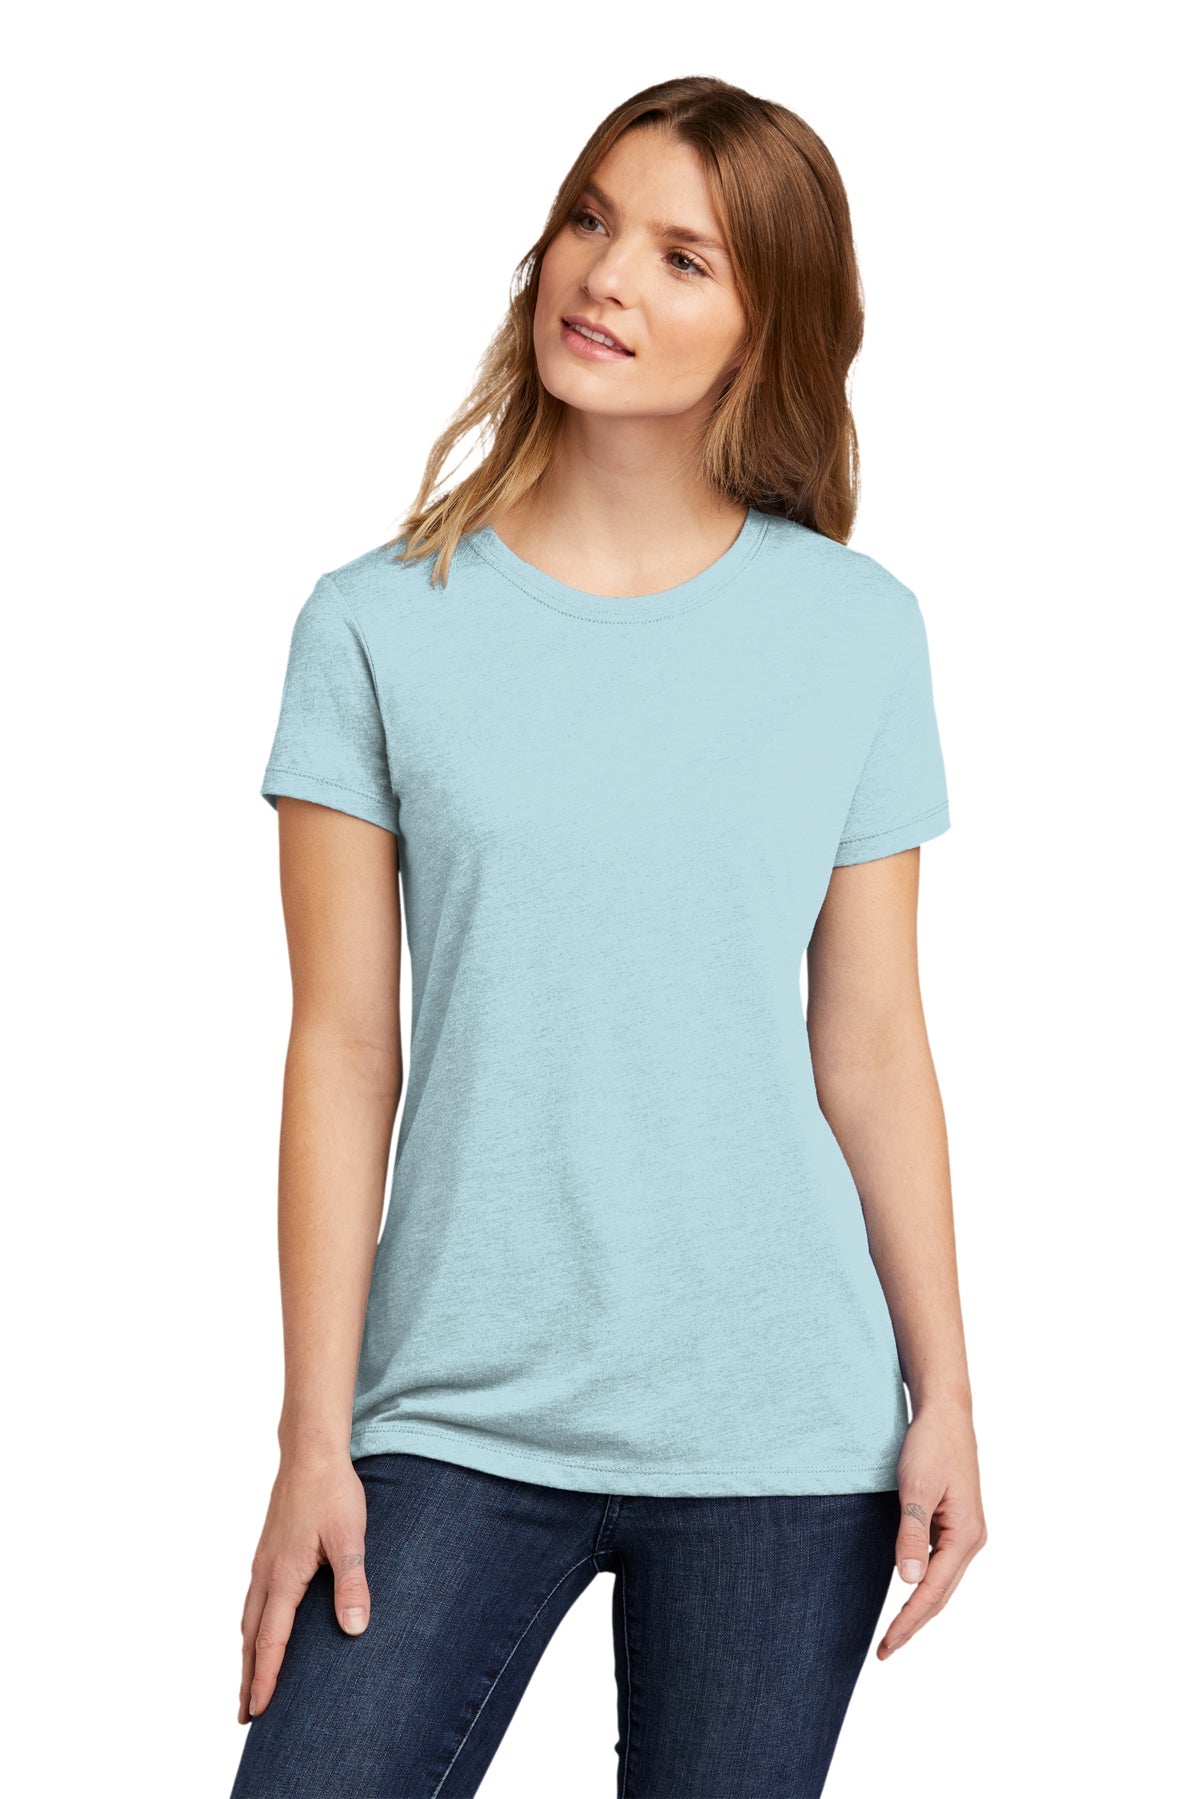 Ladies T-Shirts - Stylish and Comfortable! – Twisted Swag,